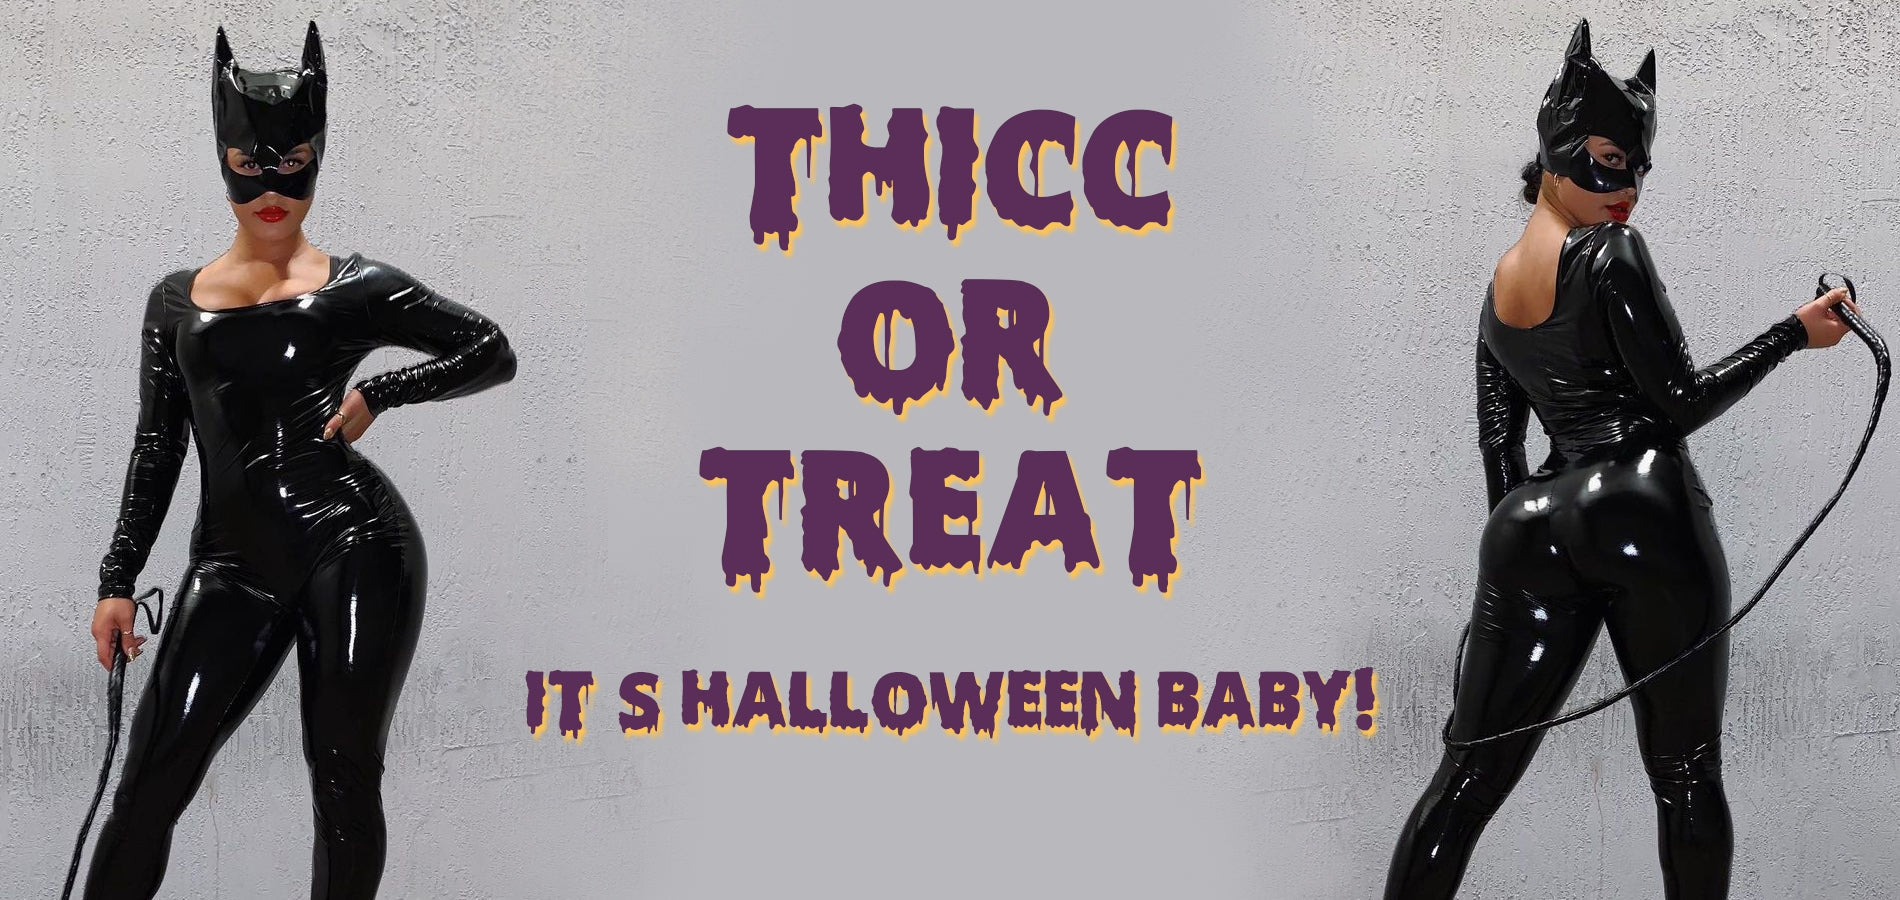 THICC or TREAT! It’s Halloween baby!-WBK FIT